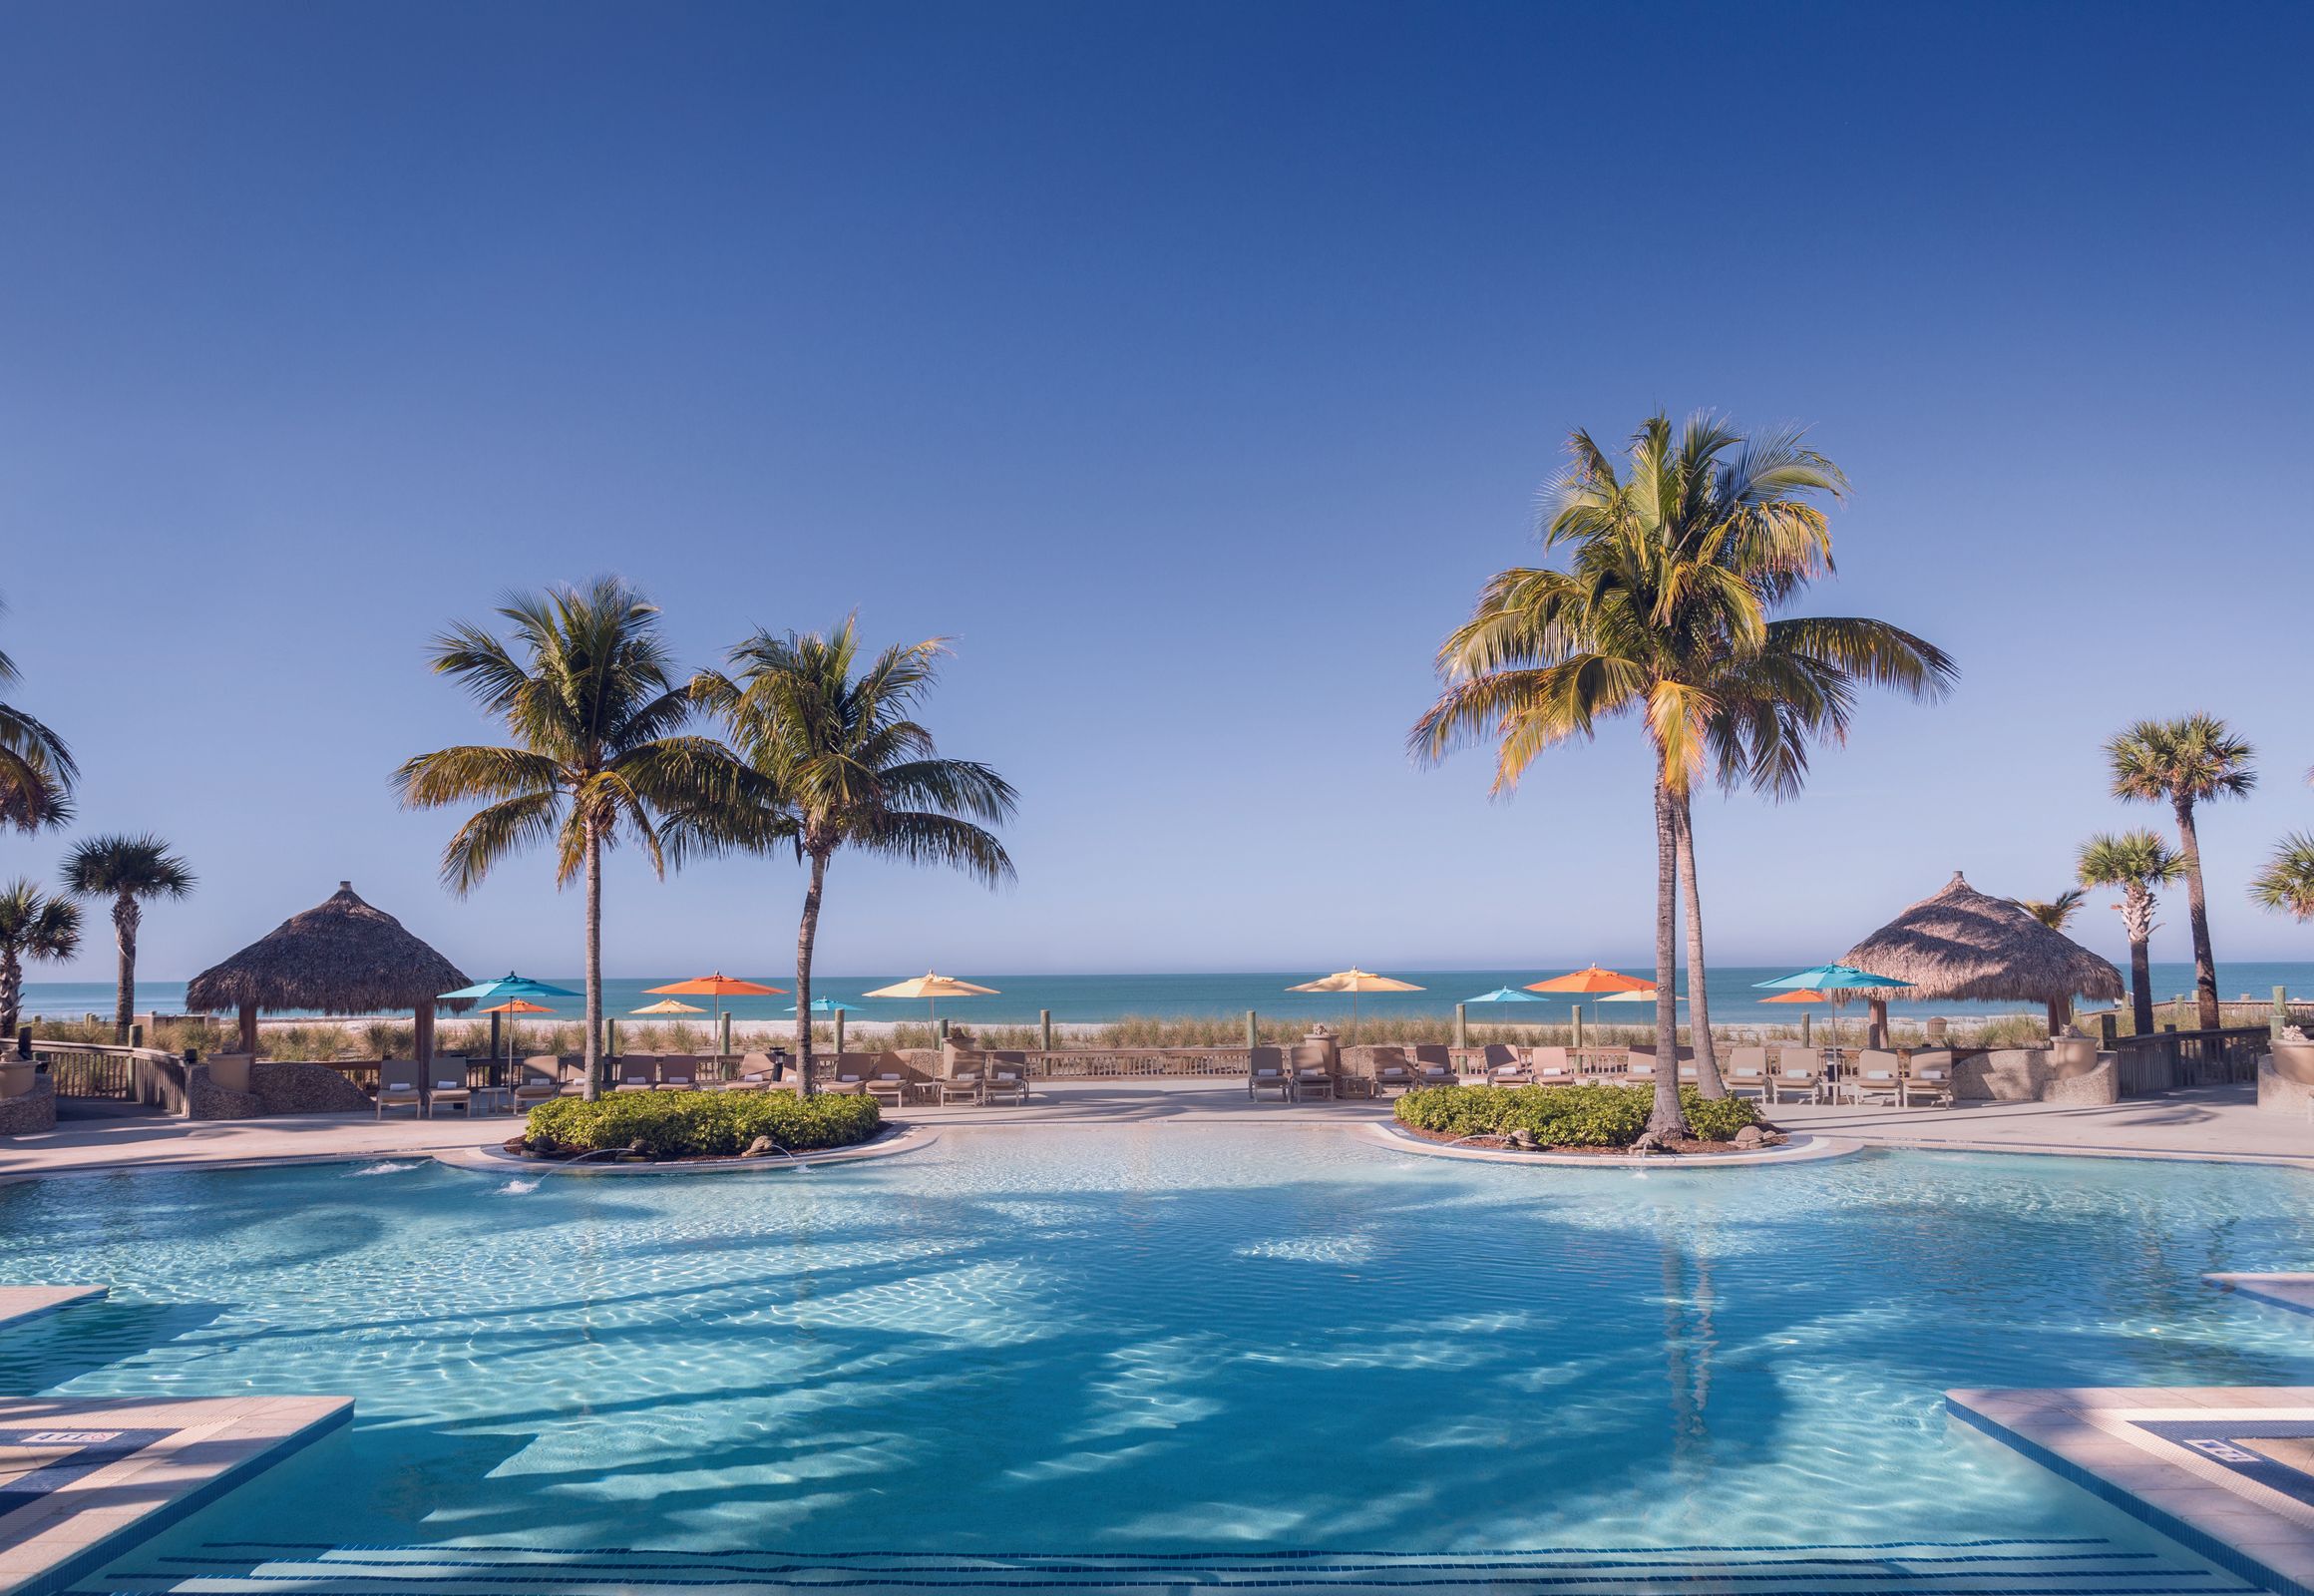 Experience Ritz Carlton Sarasota In 2023 | Bookings With VIP Benefits ...